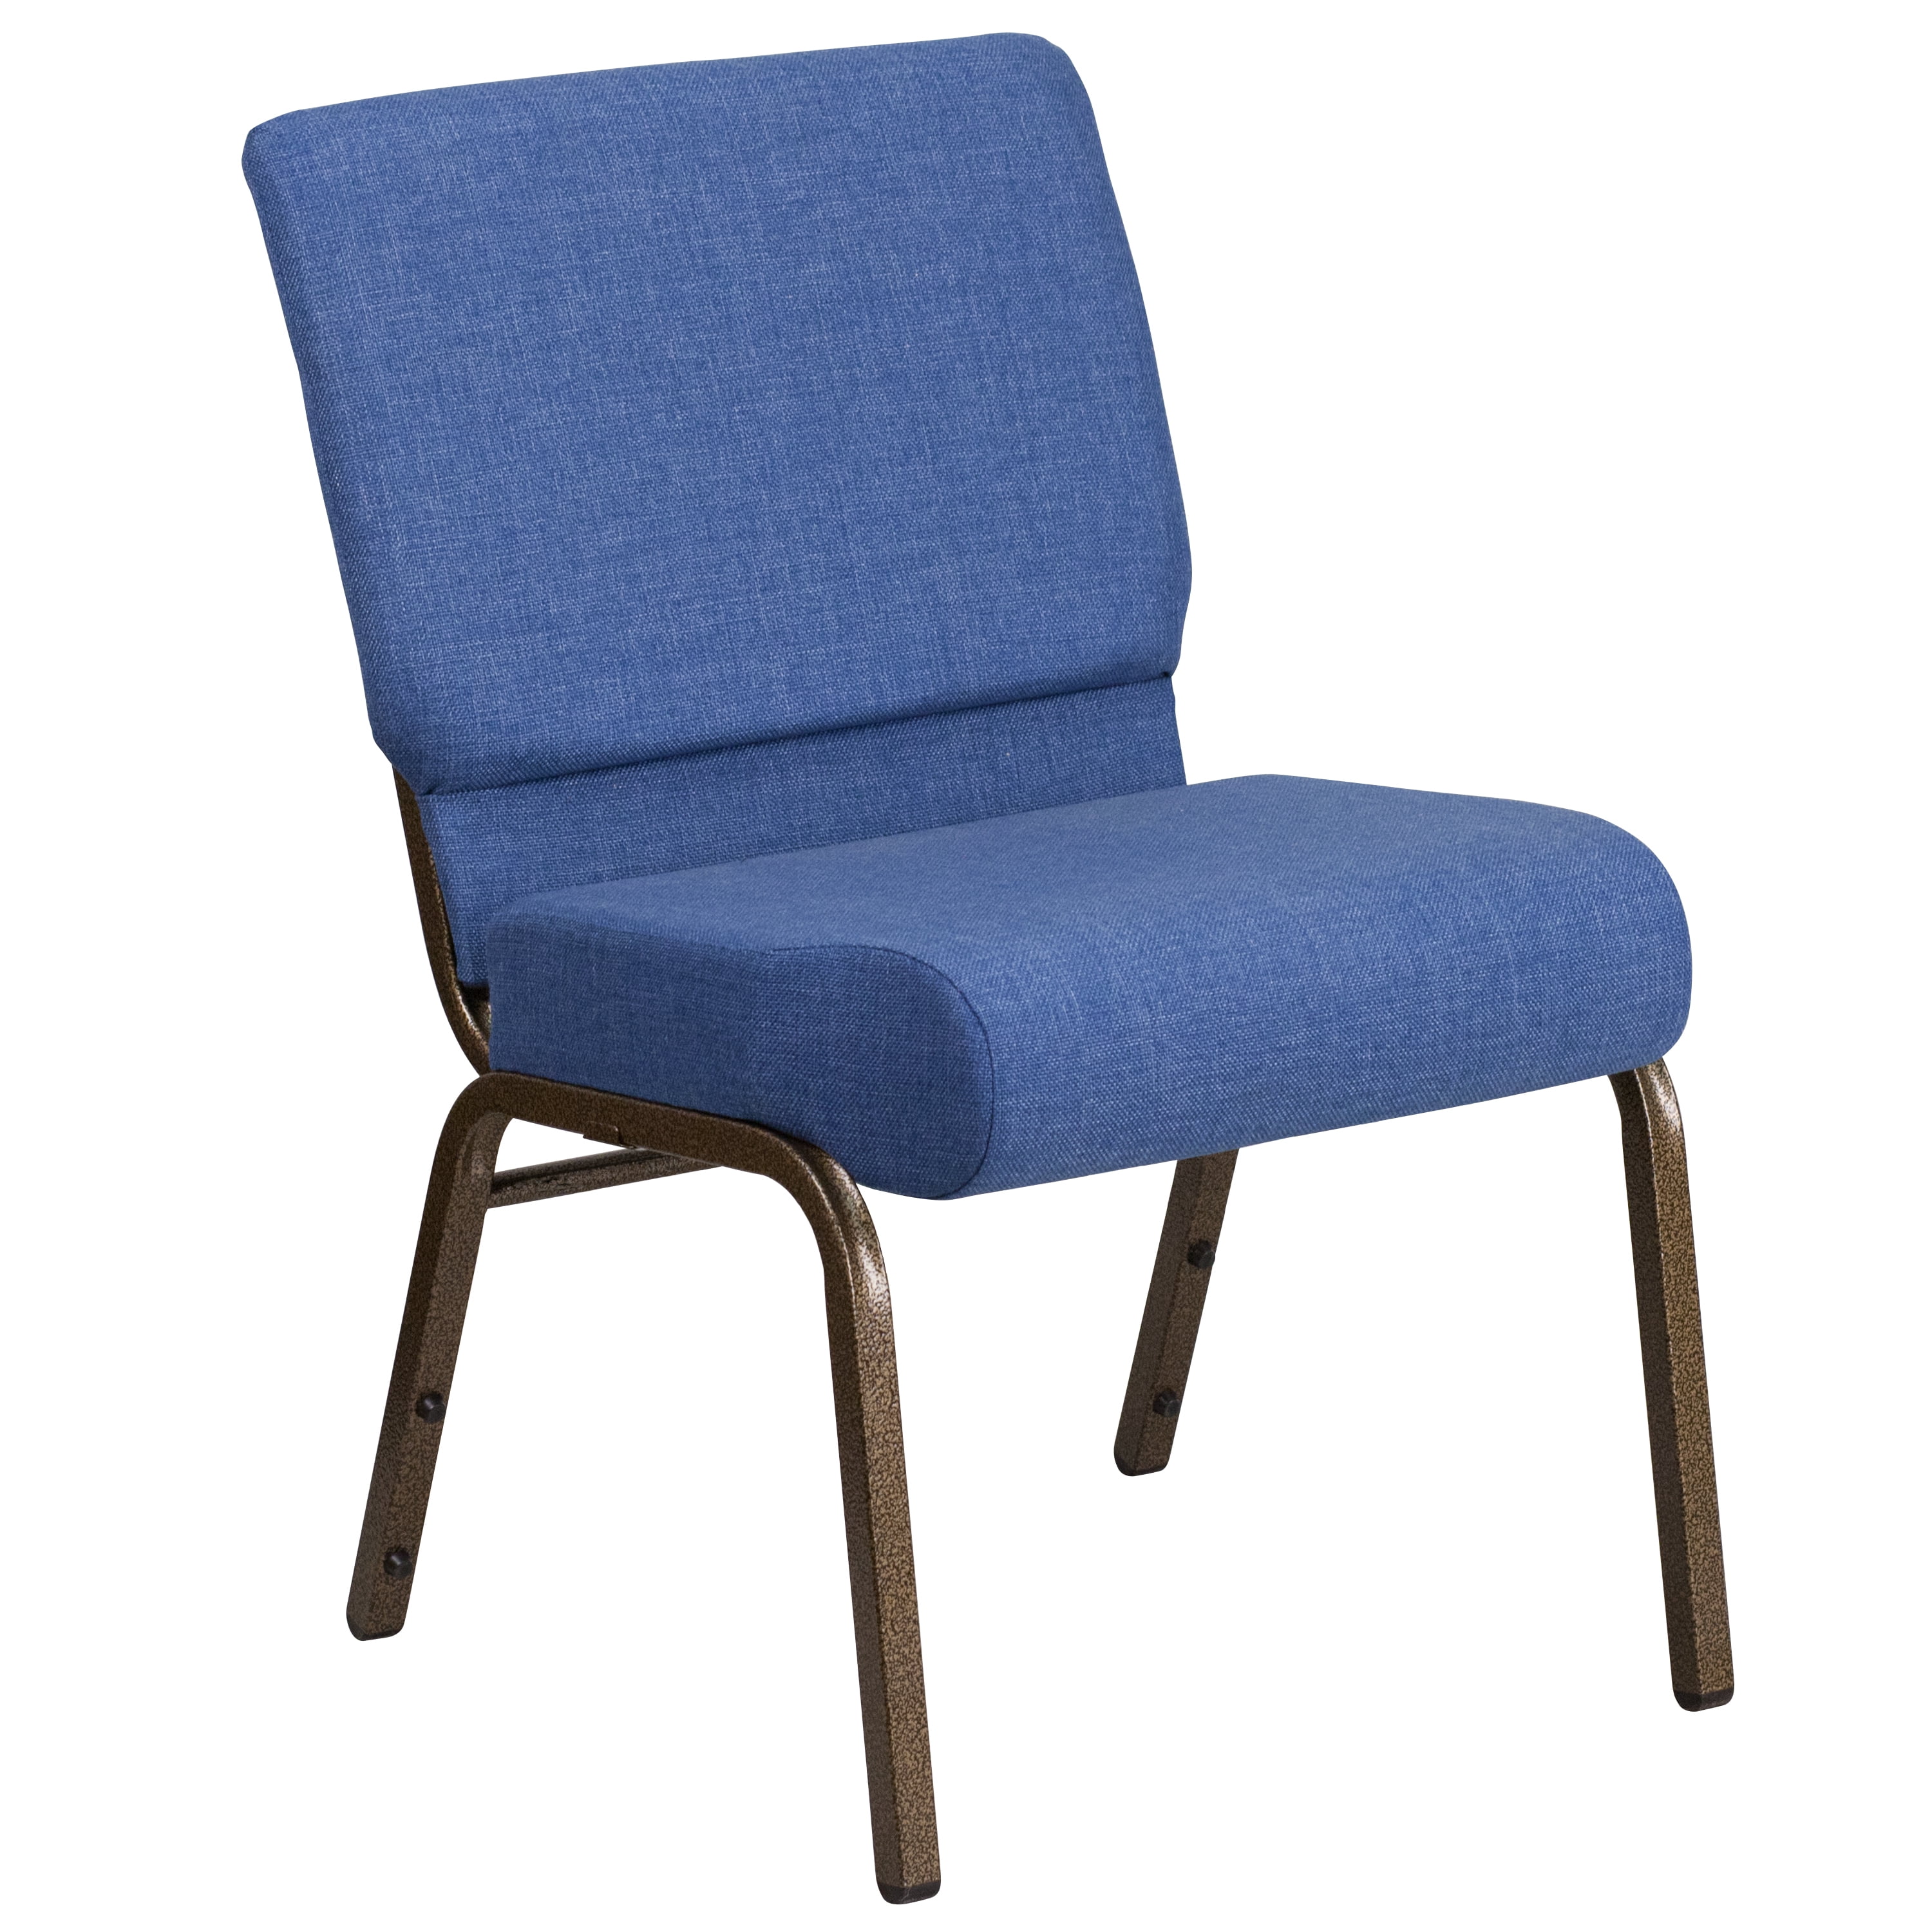 Flash Furniture HERCULES Series 21''W Stacking Church Chair in Blue Fabric - Gold Vein Frame - image 2 of 12